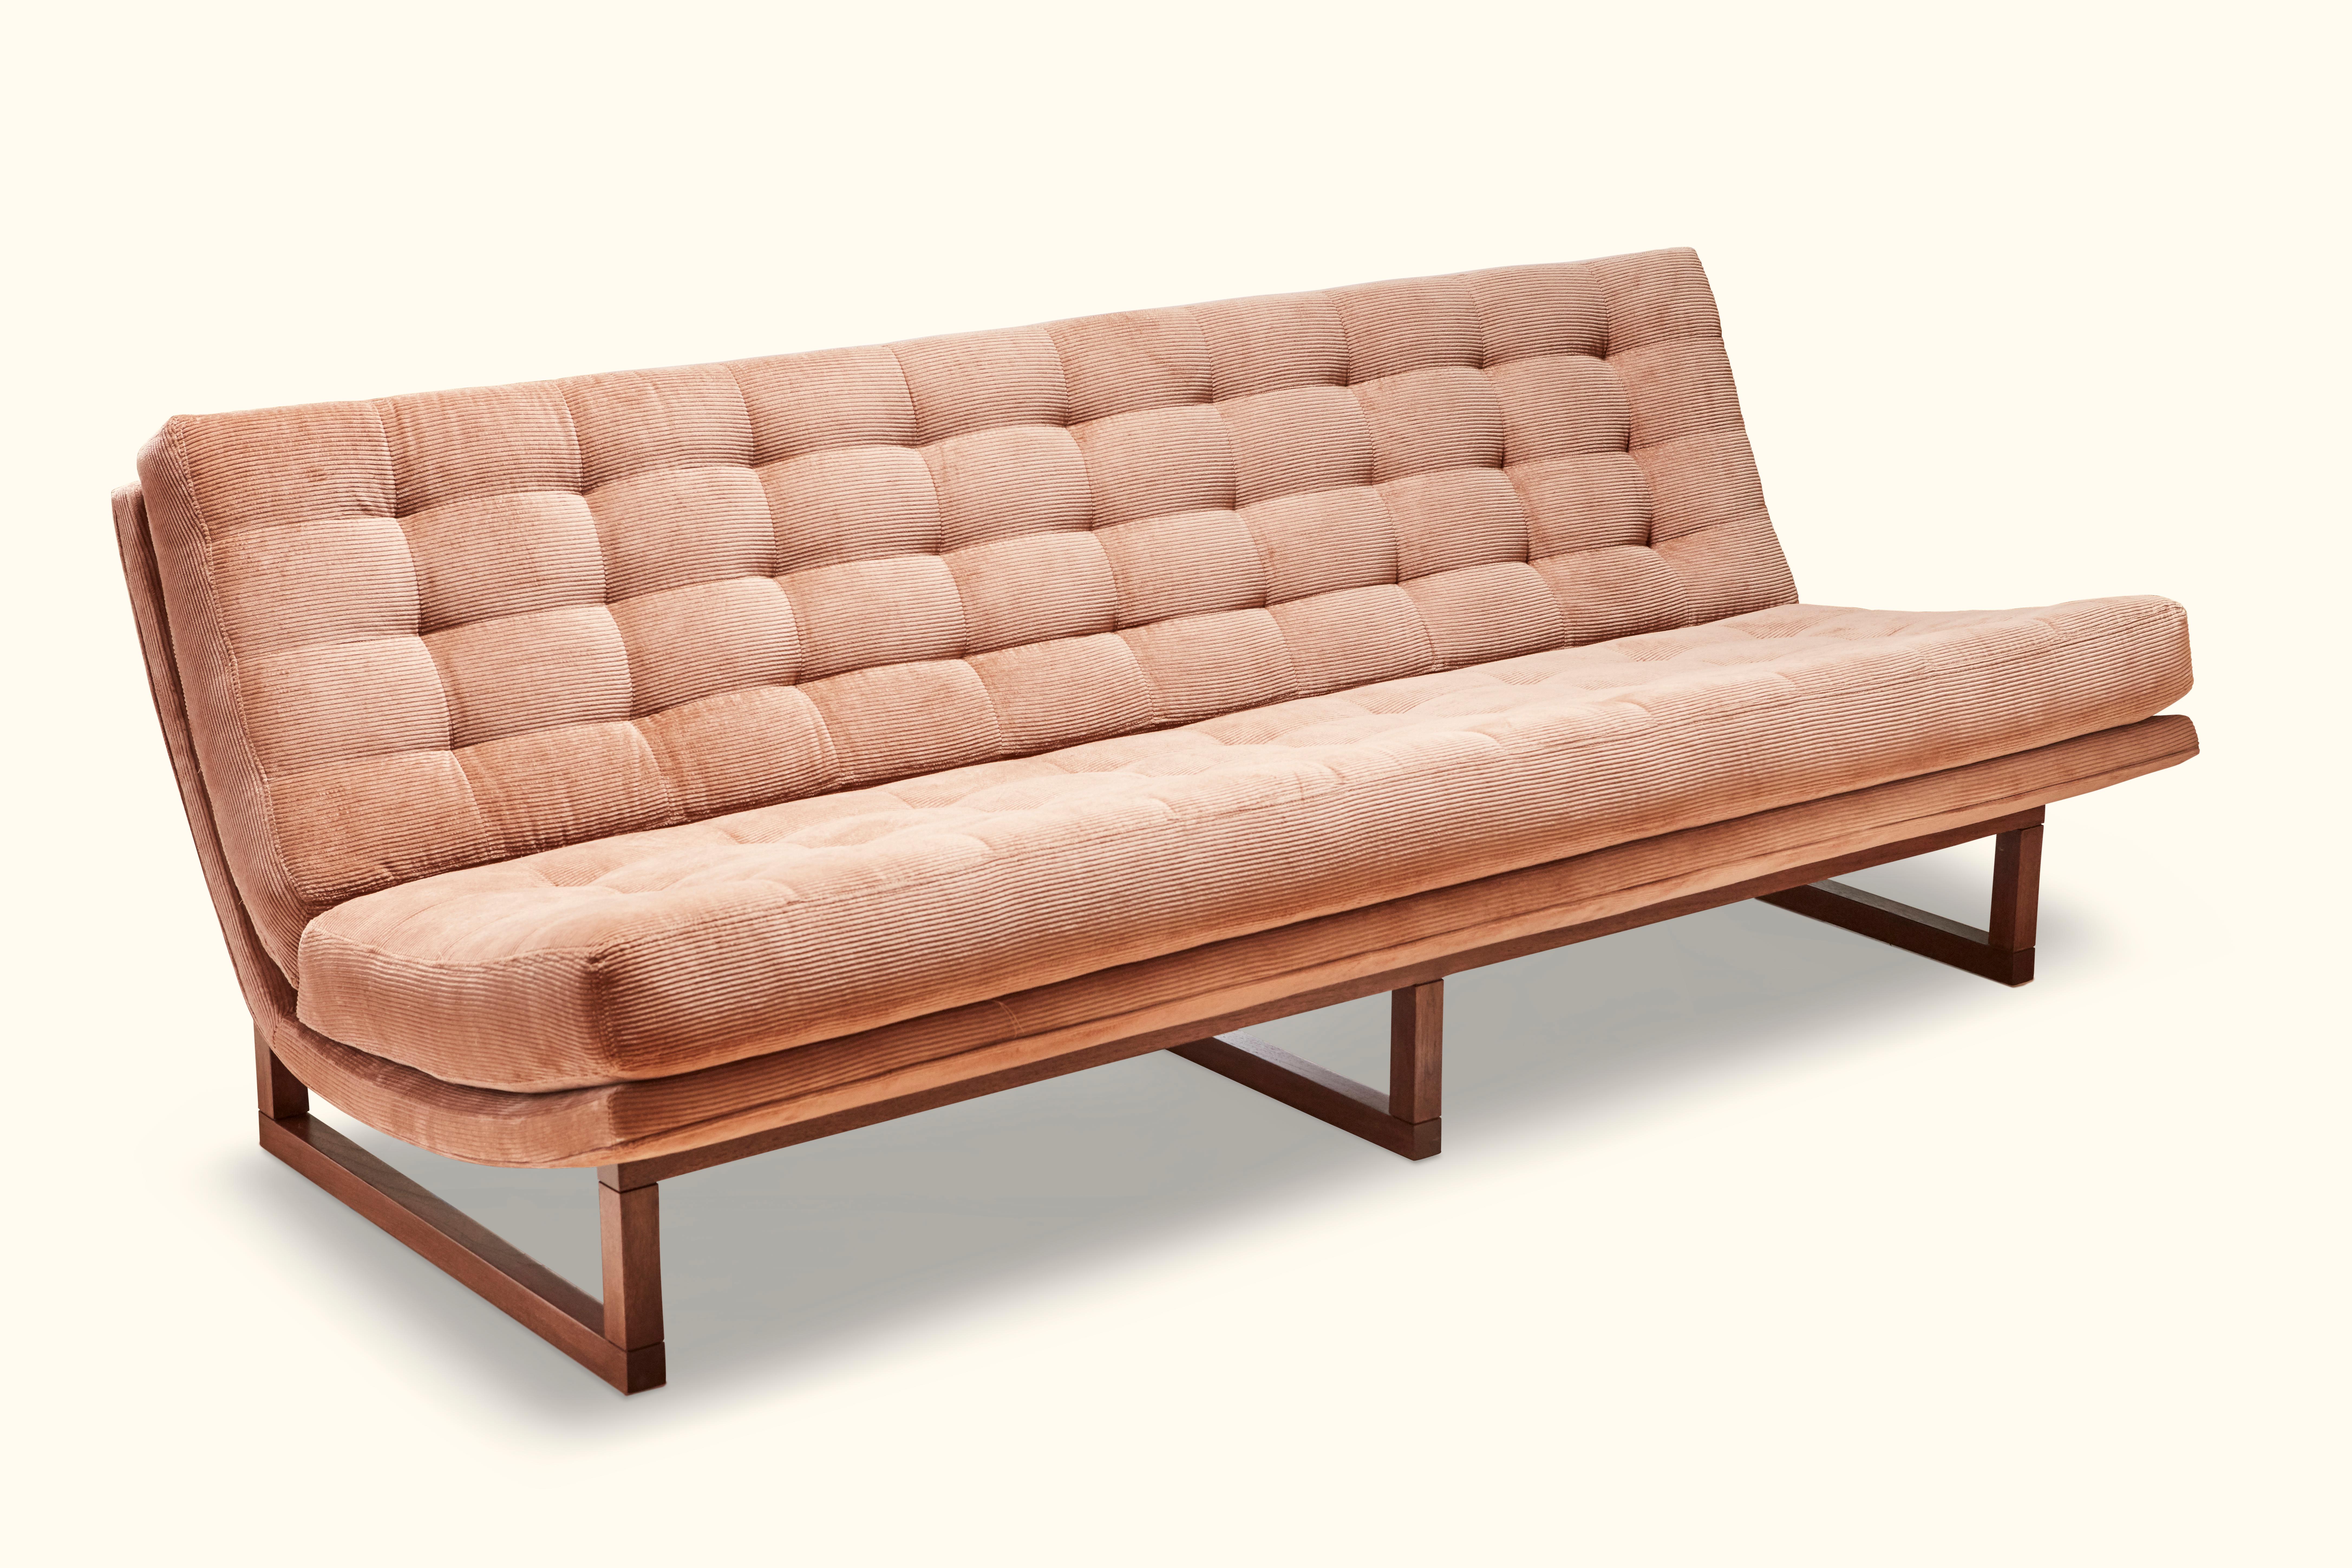 The Griffin sofa is a wide, armless lounge sofa that features biscuit tufting with no buttons. Frame available in American walnut or white oak.
